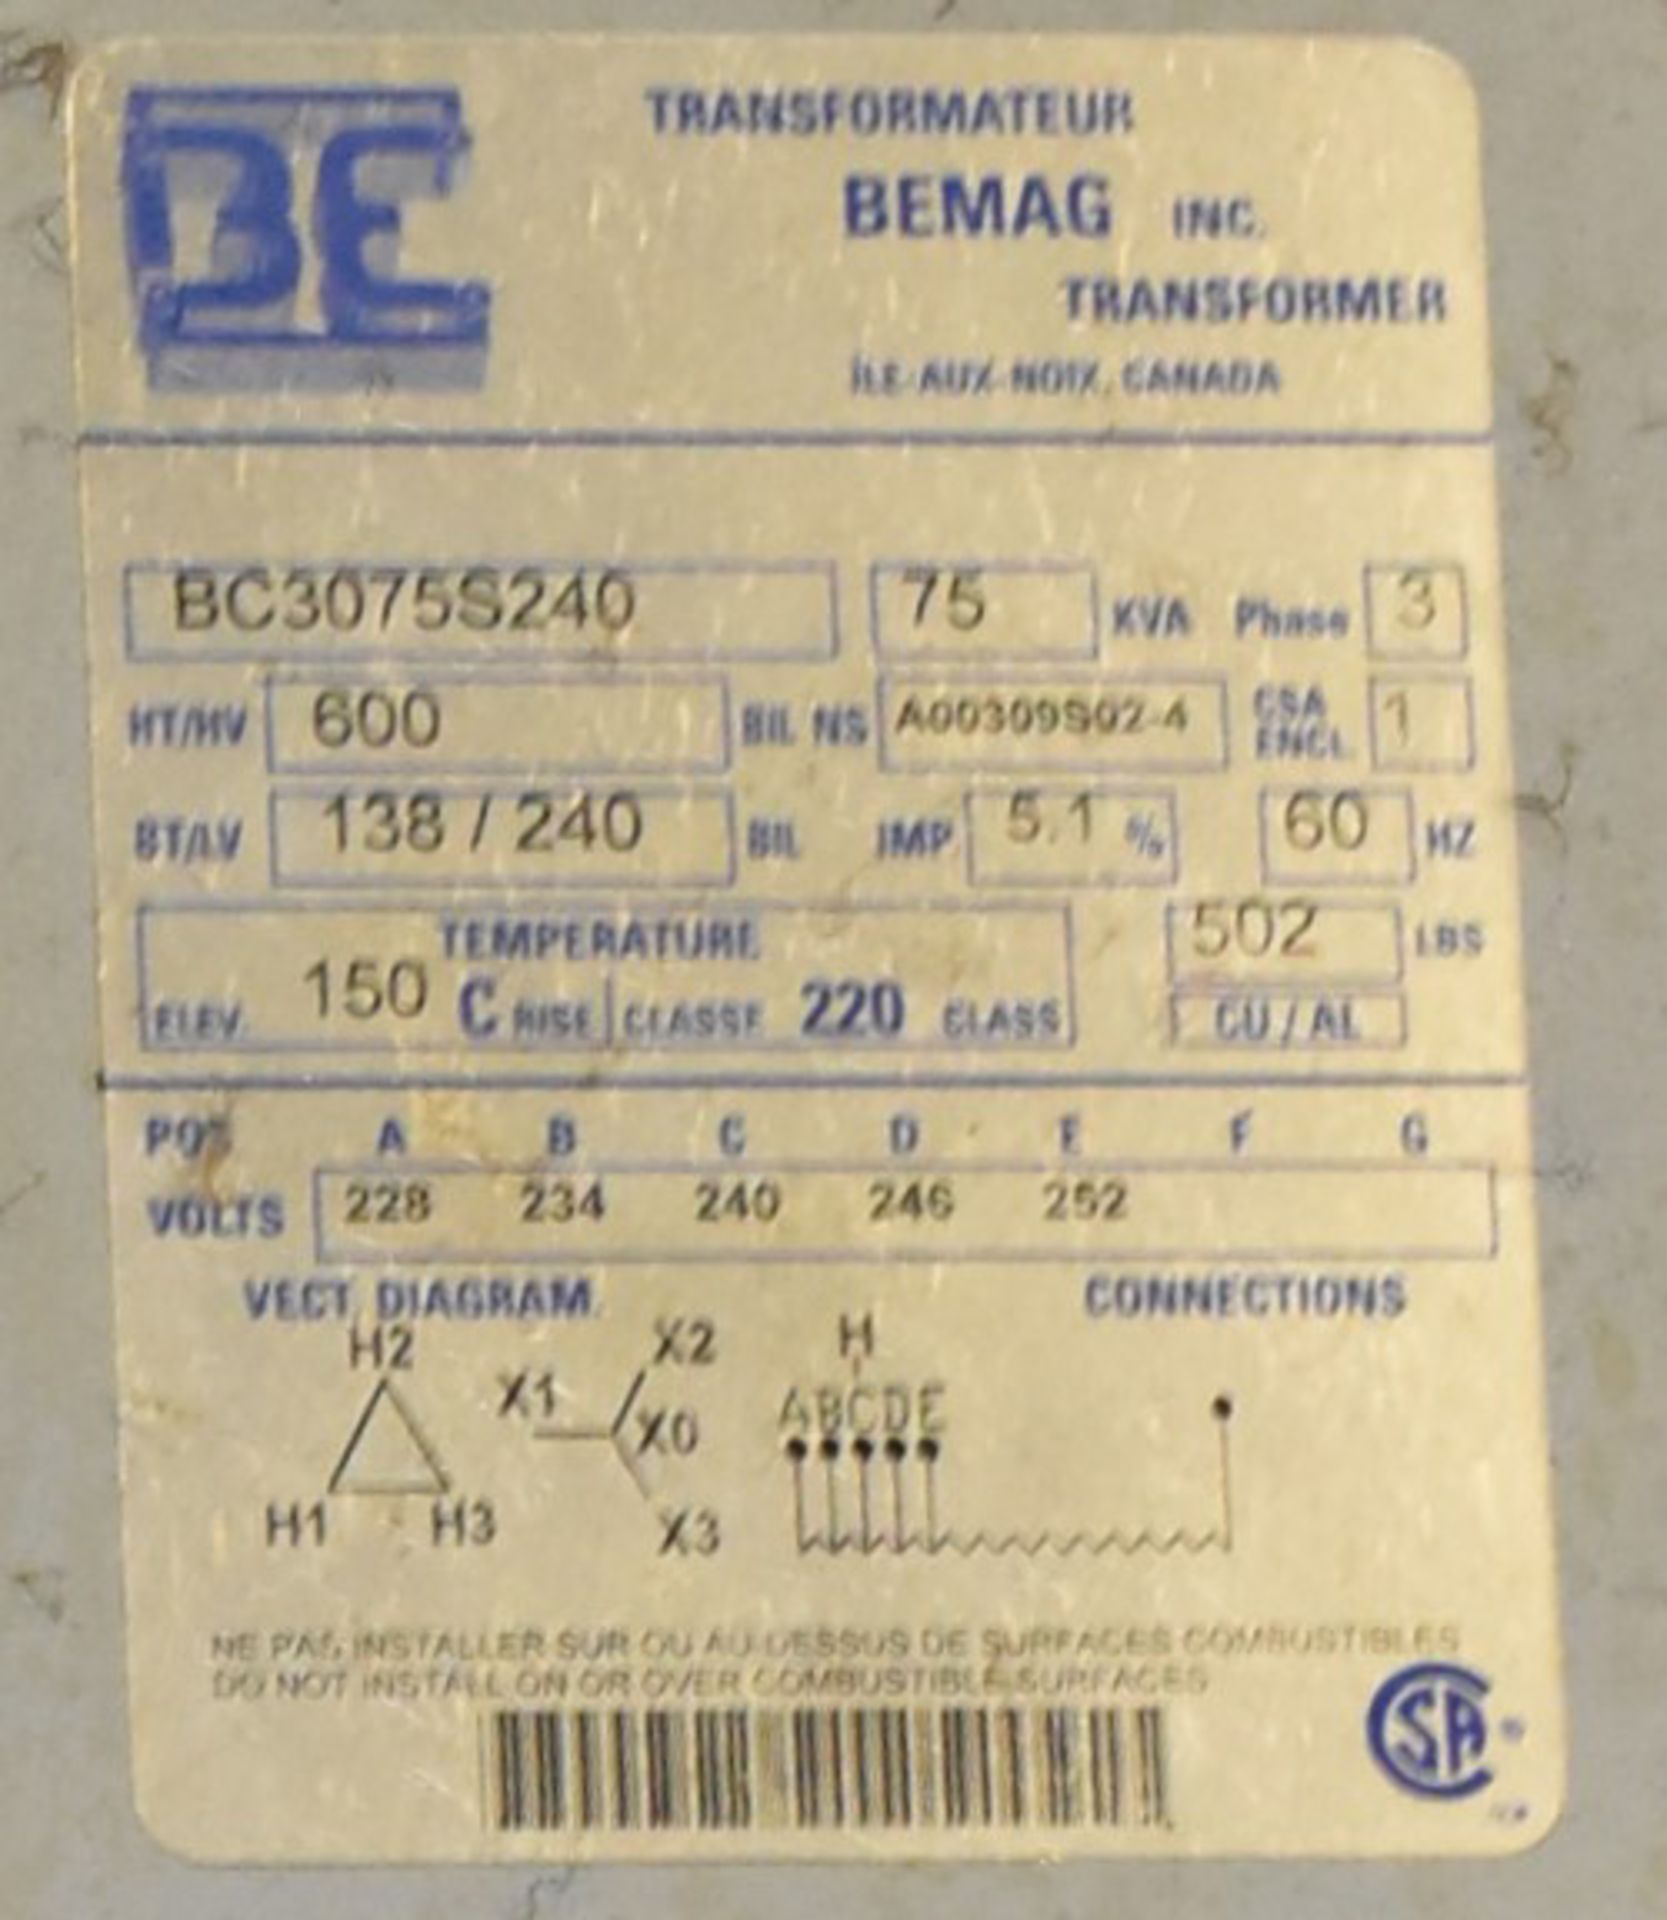 BEMAG BC3075S240 75 KVA TRANSFORMER, 600-240-138V/3PH/60HZ, S/N A000309S02-4 (CI) [RIGGING FE FOR - Image 2 of 2